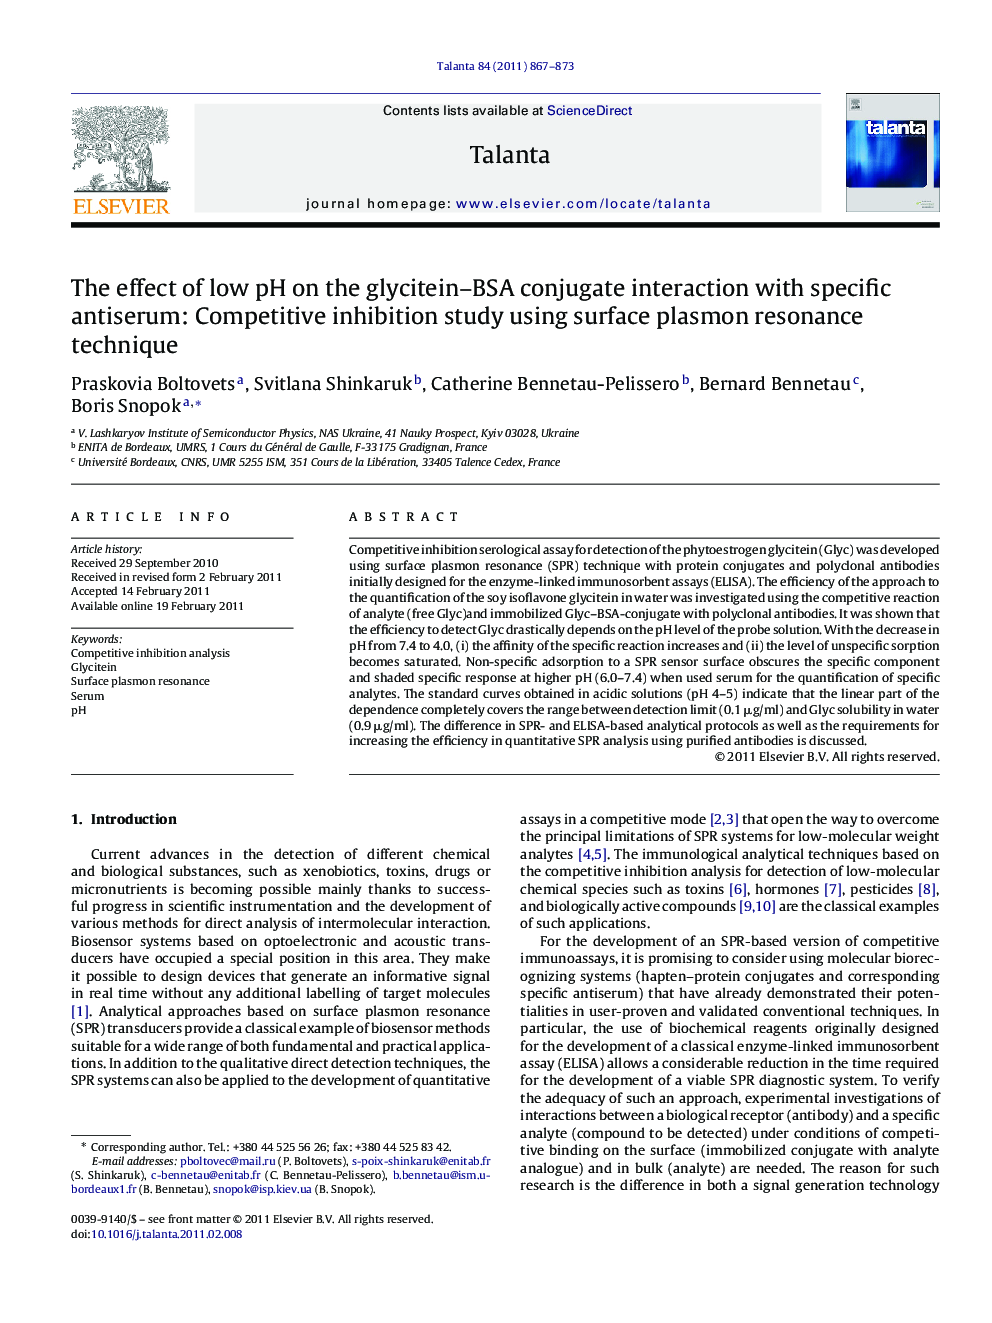 The effect of low pH on the glycitein–BSA conjugate interaction with specific antiserum: Competitive inhibition study using surface plasmon resonance technique